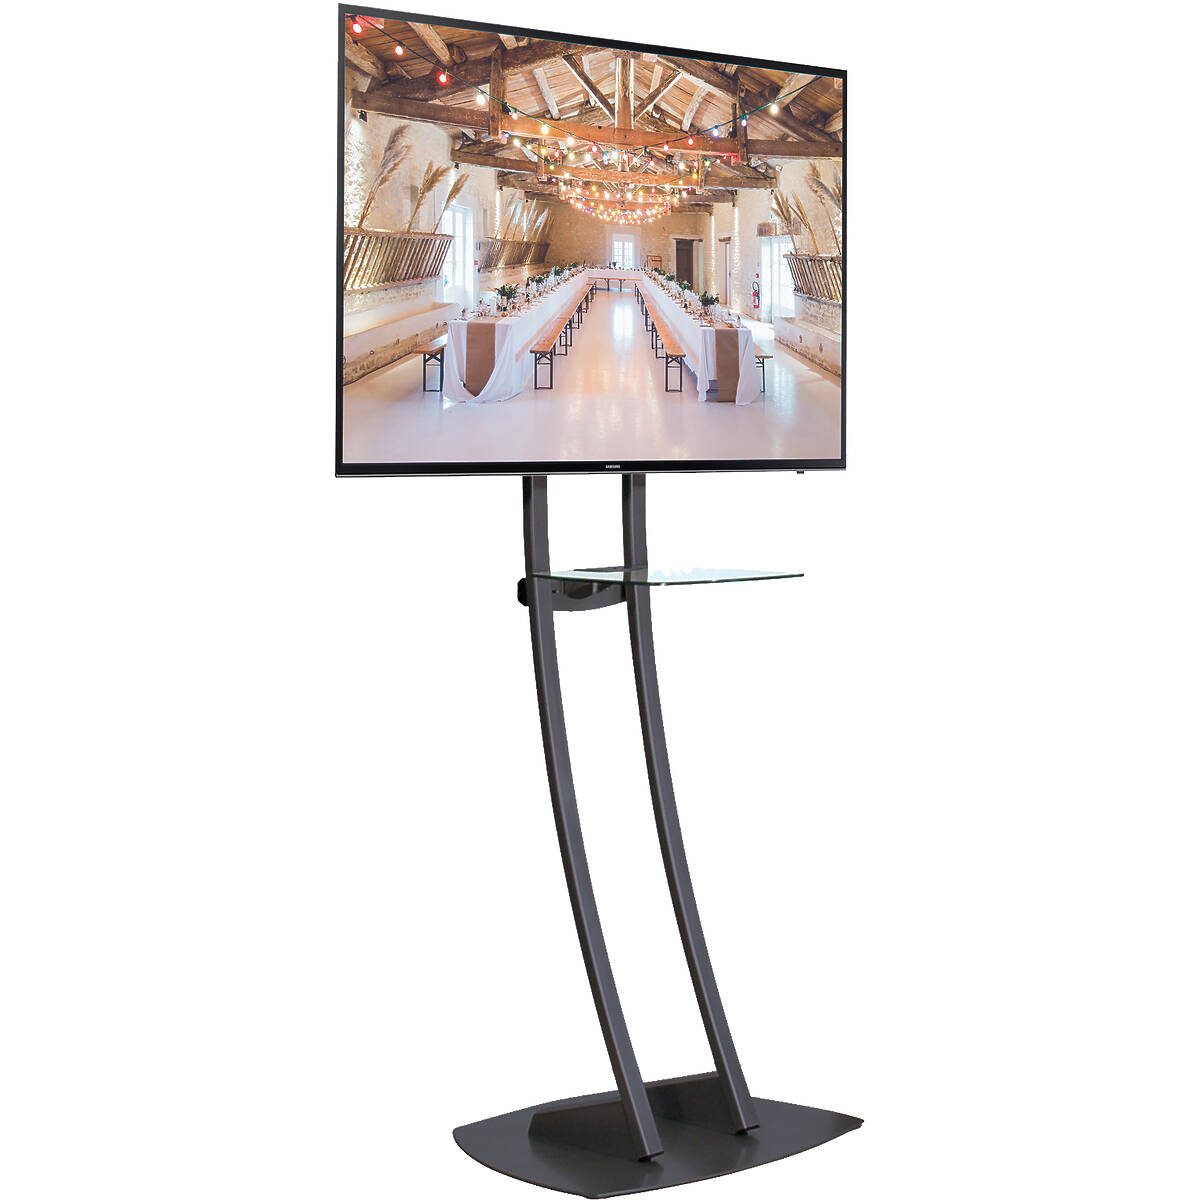 Unicol PA9 Parabella stand, designer high level stand for screens from 71-80" product image. Click to enlarge.